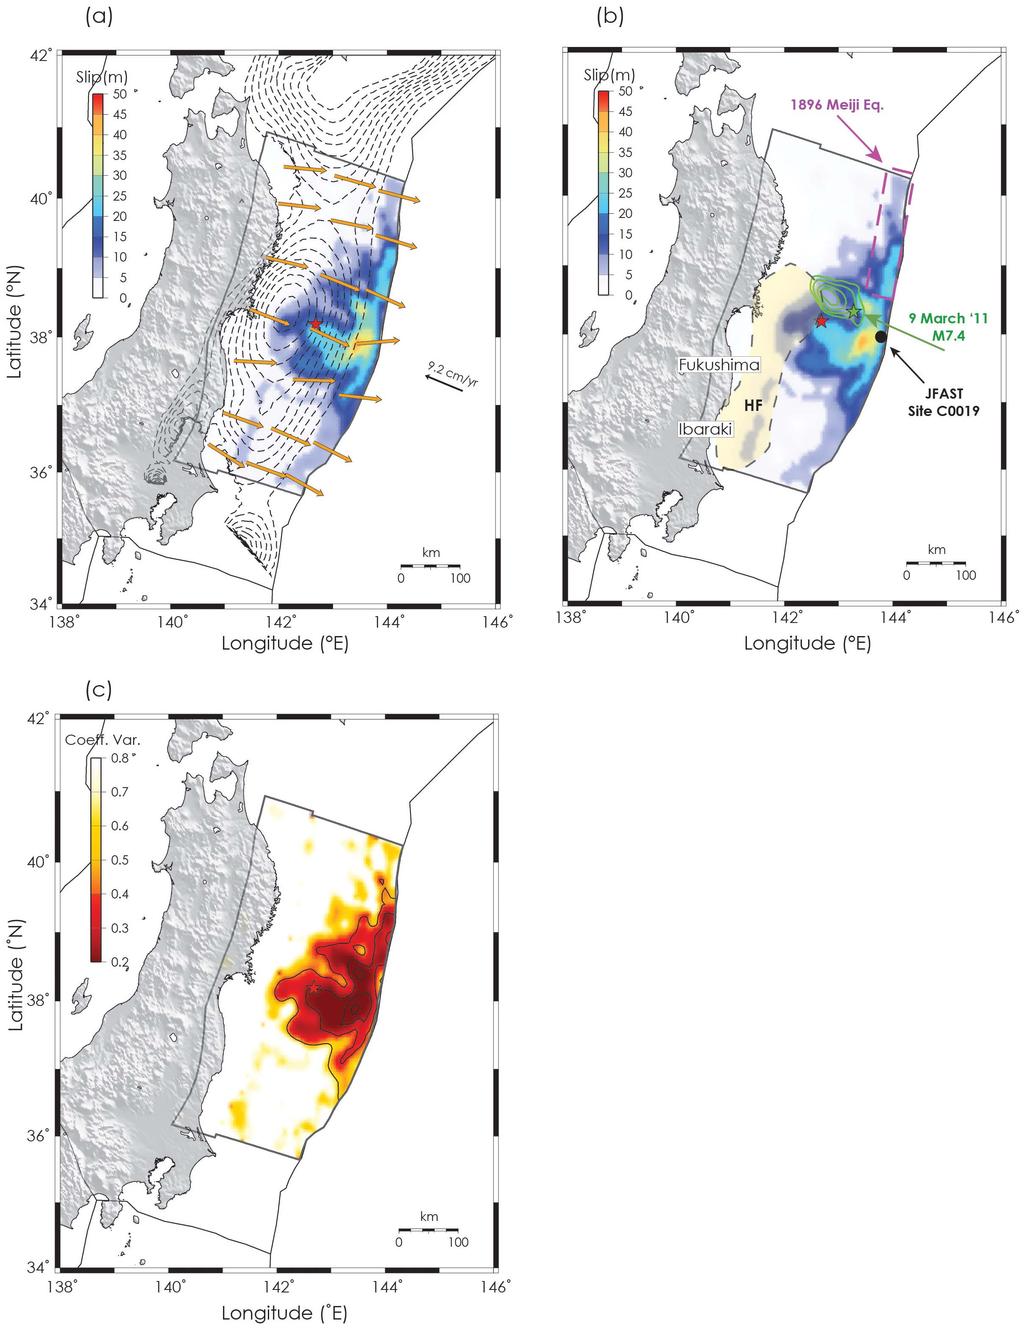 Figure 3 Slip distribution. Slip distribution for the 2011 Tohoku-oki earthquake obtained from the joint inversion of tsunami and geodetic data.